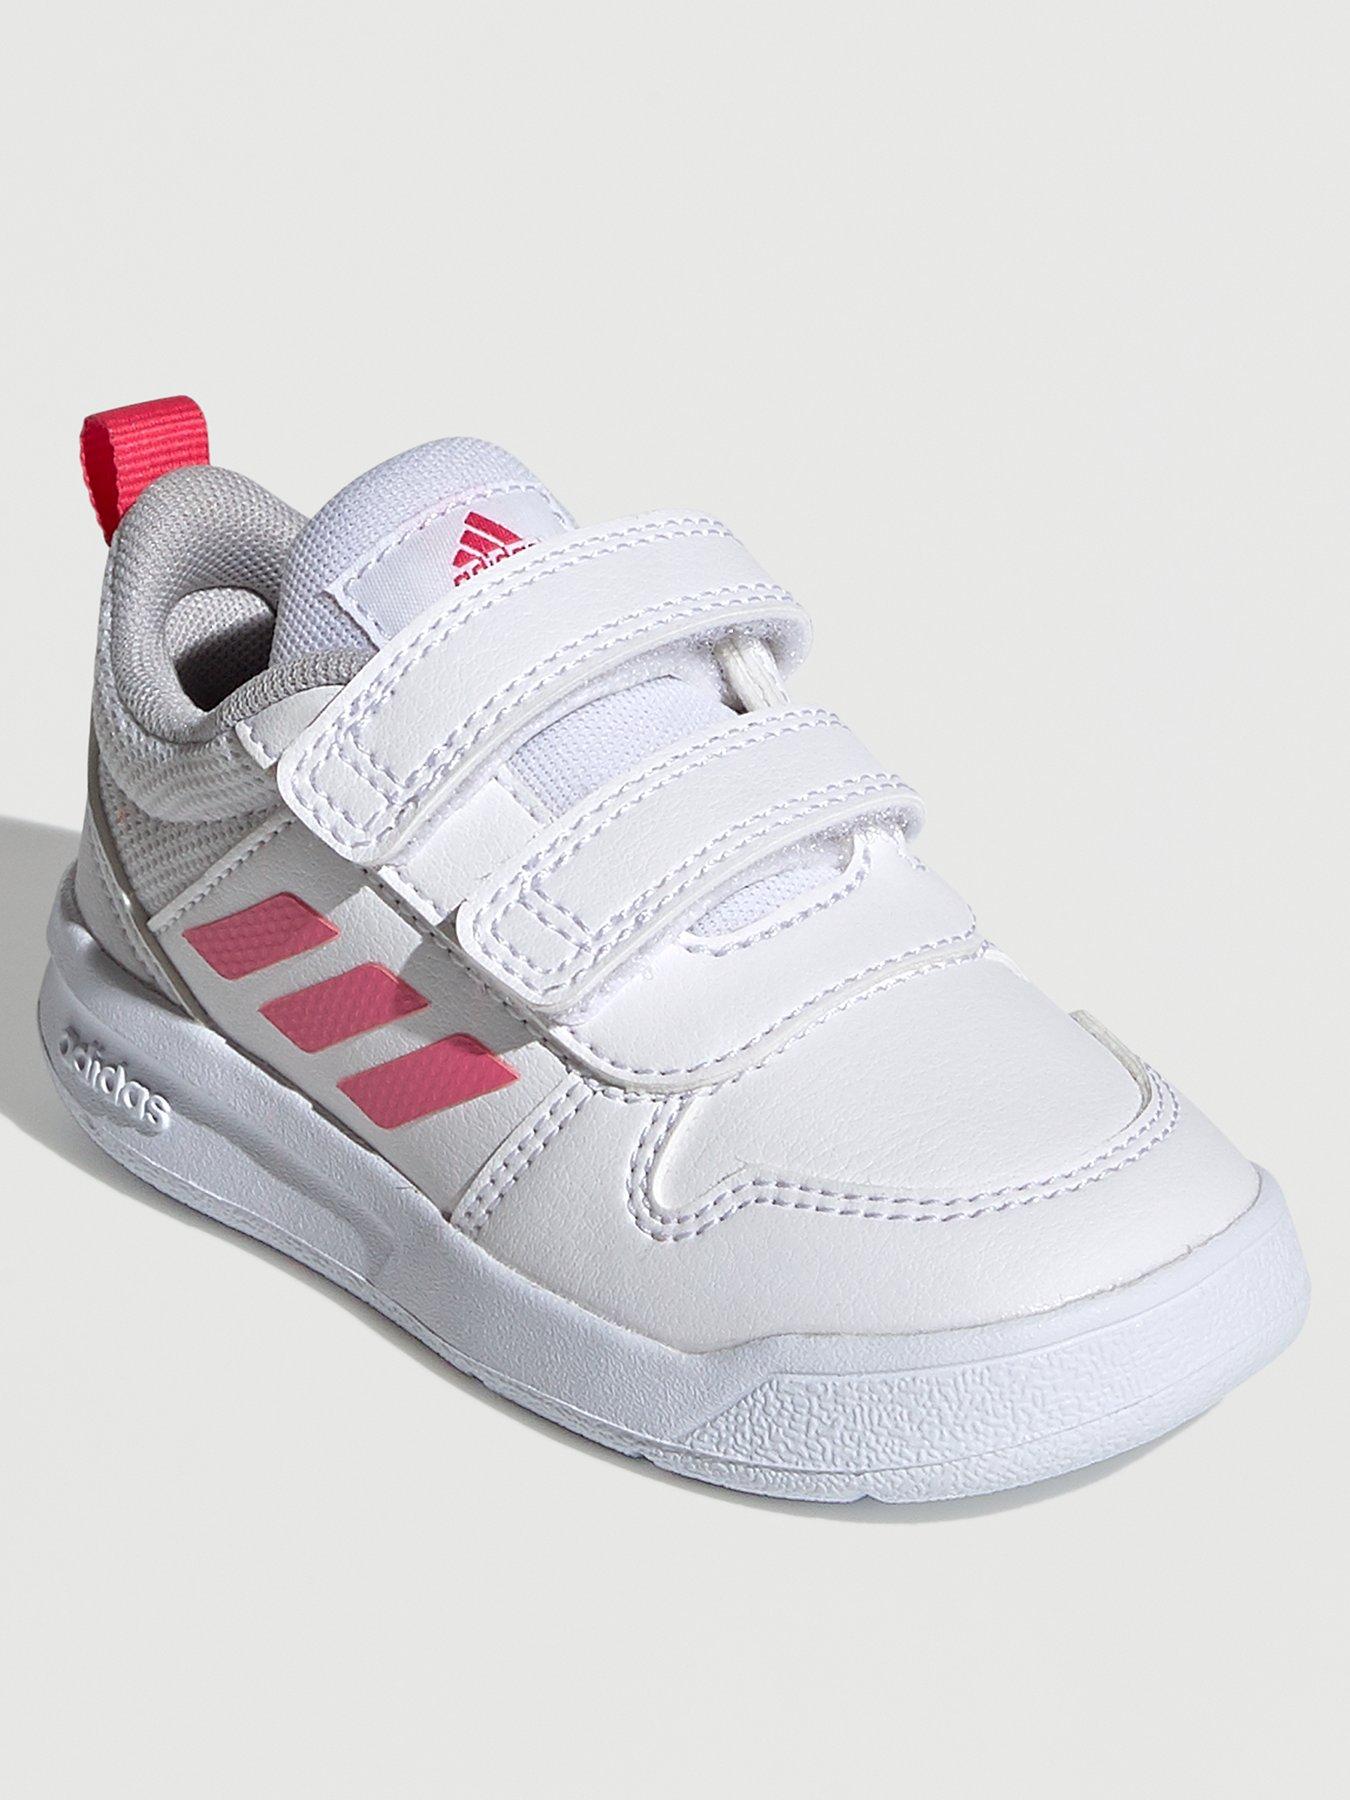 toddler size 6 adidas trainers